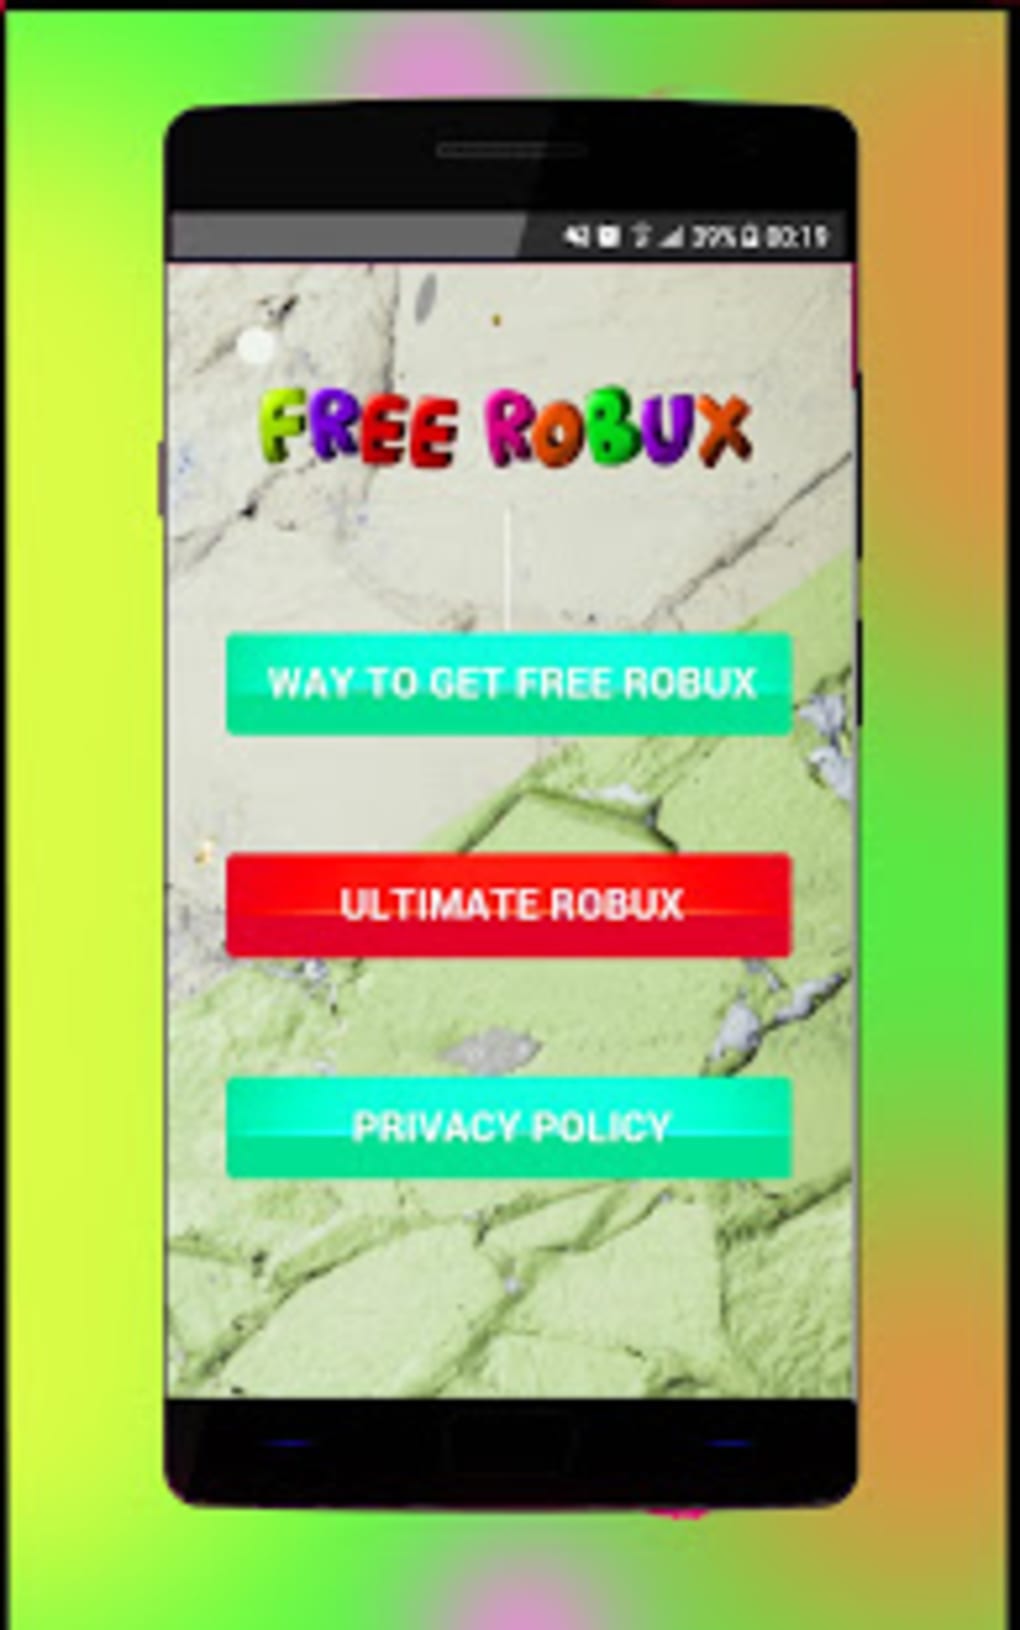 How To Get Free Robux On Windows 10 Roblox